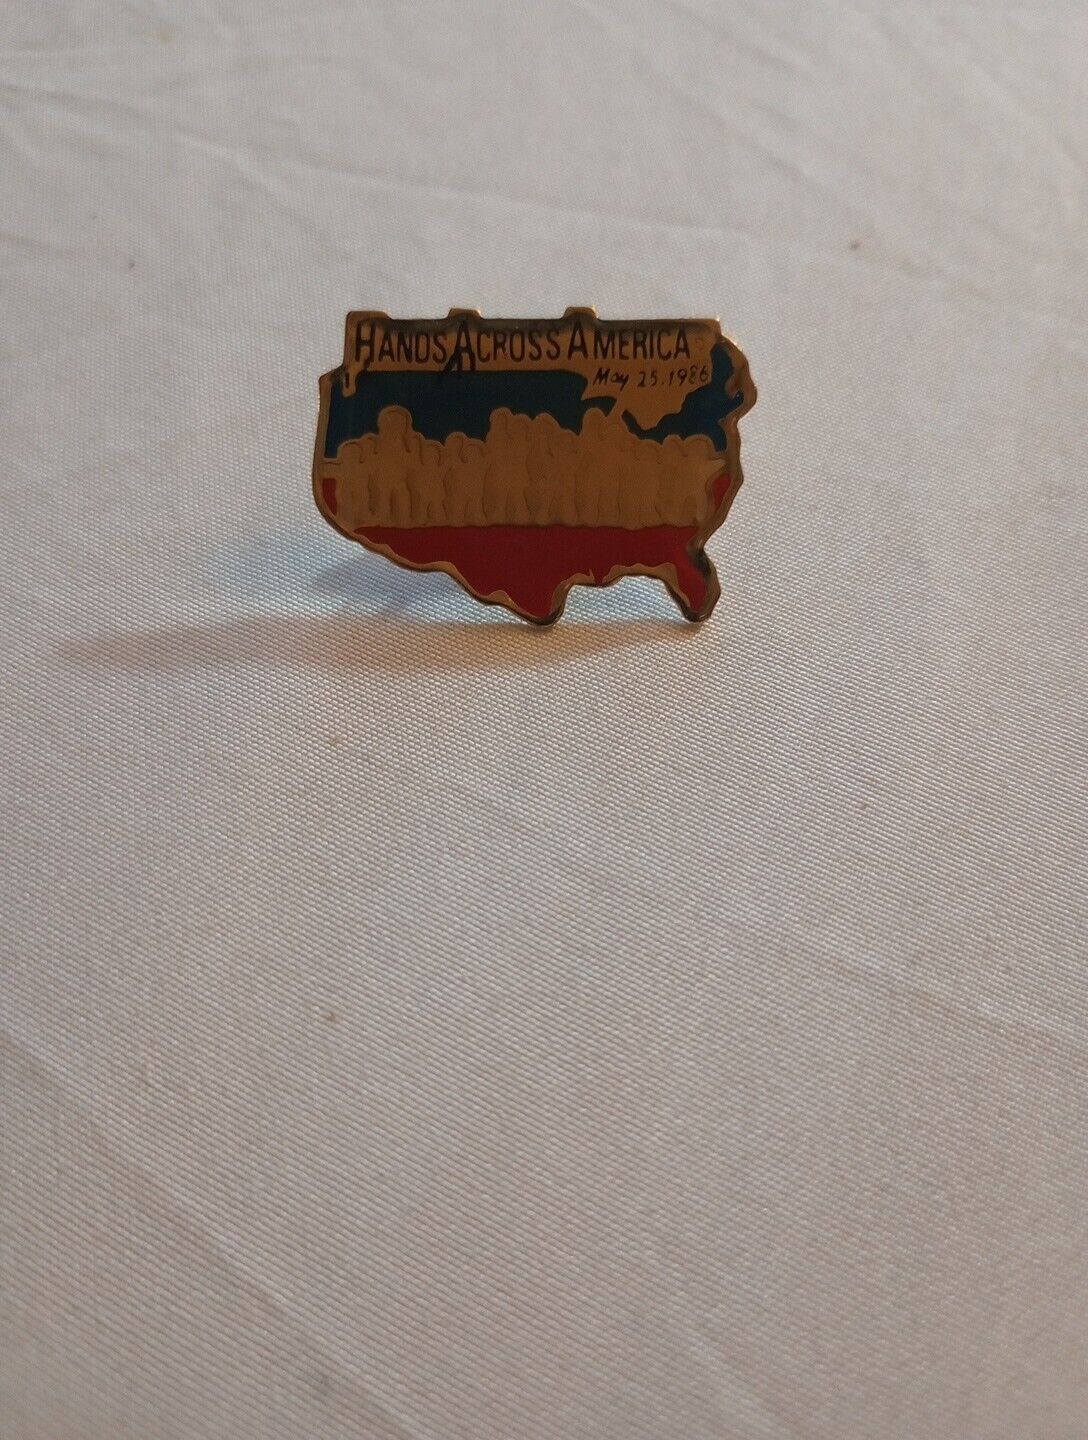 Hands Across America Lapel Pin May 25, 1986 Map Shaped Red White & Blue Vintage